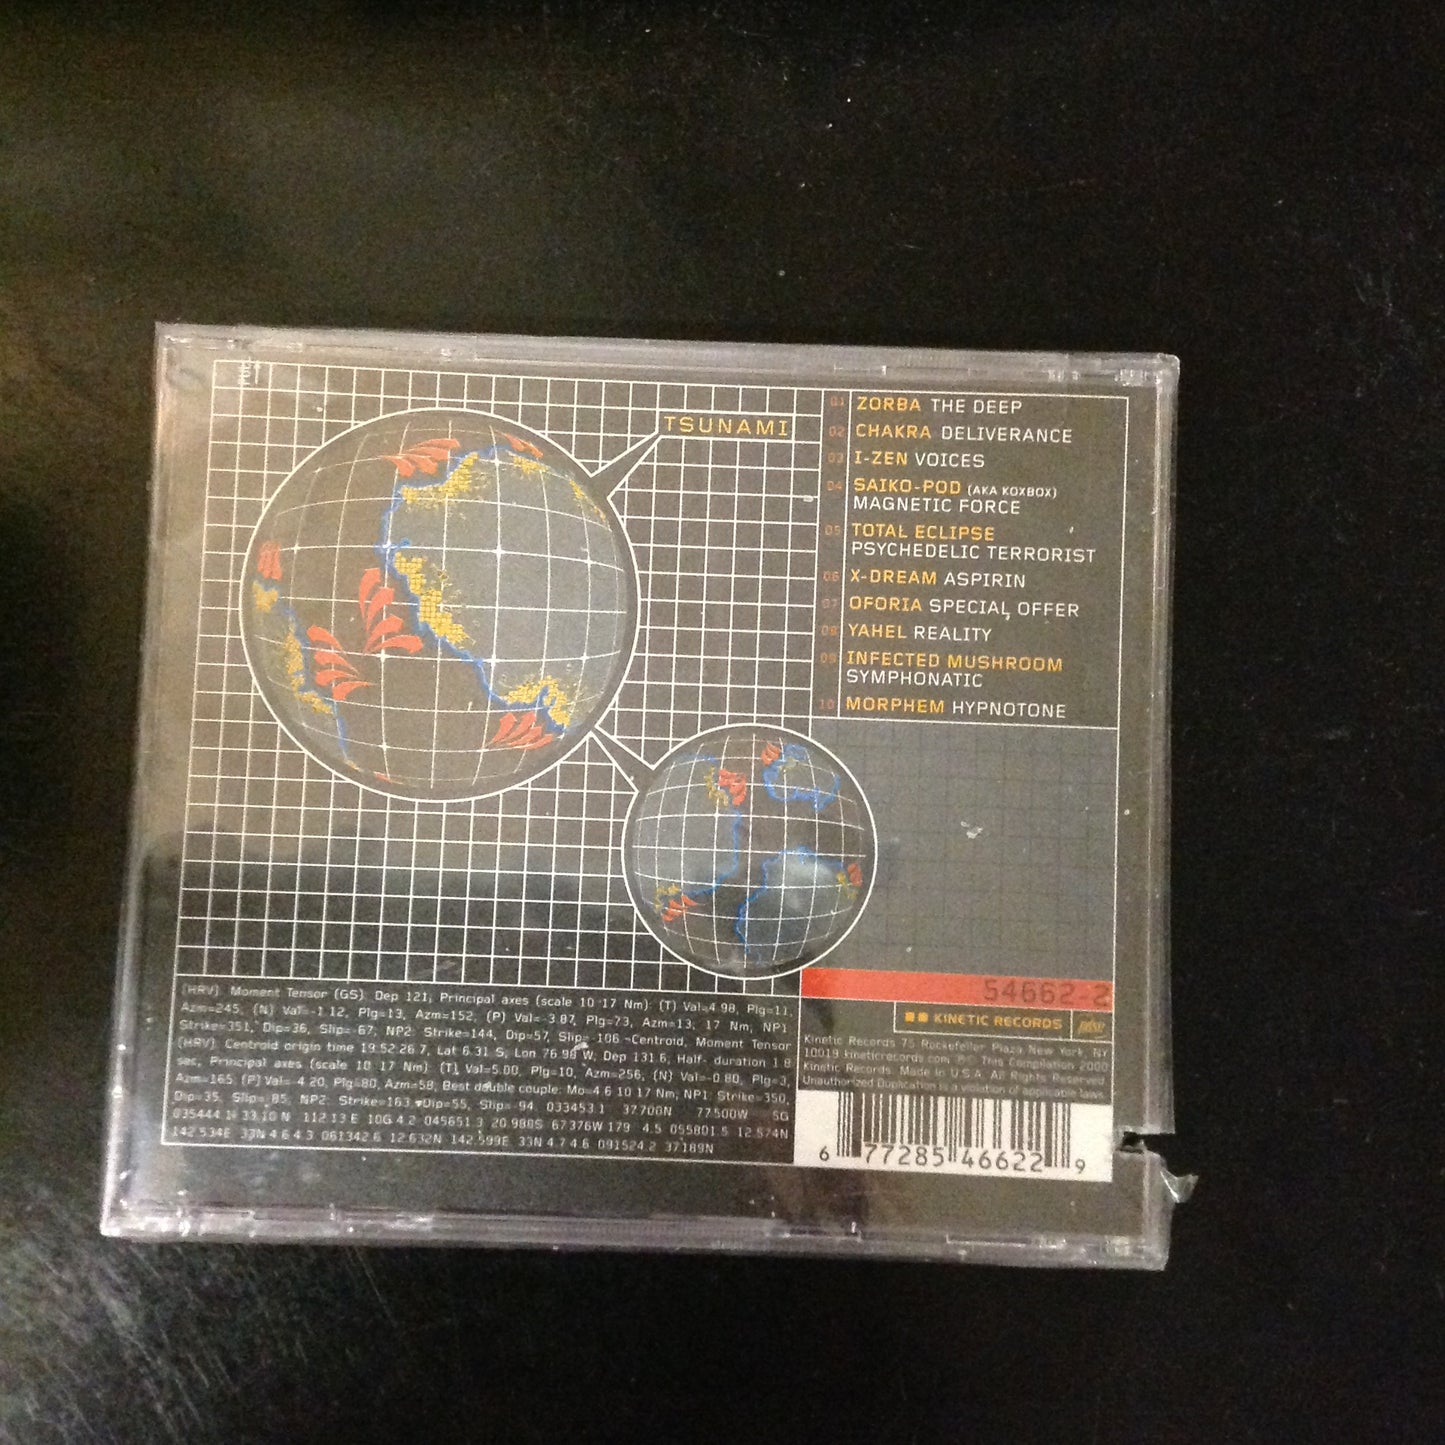 CD SEALED Tsunami Comp Compilation Various Artists Trance Electronic Psy-Trance Psychedelic 54662-2 HTF Rare